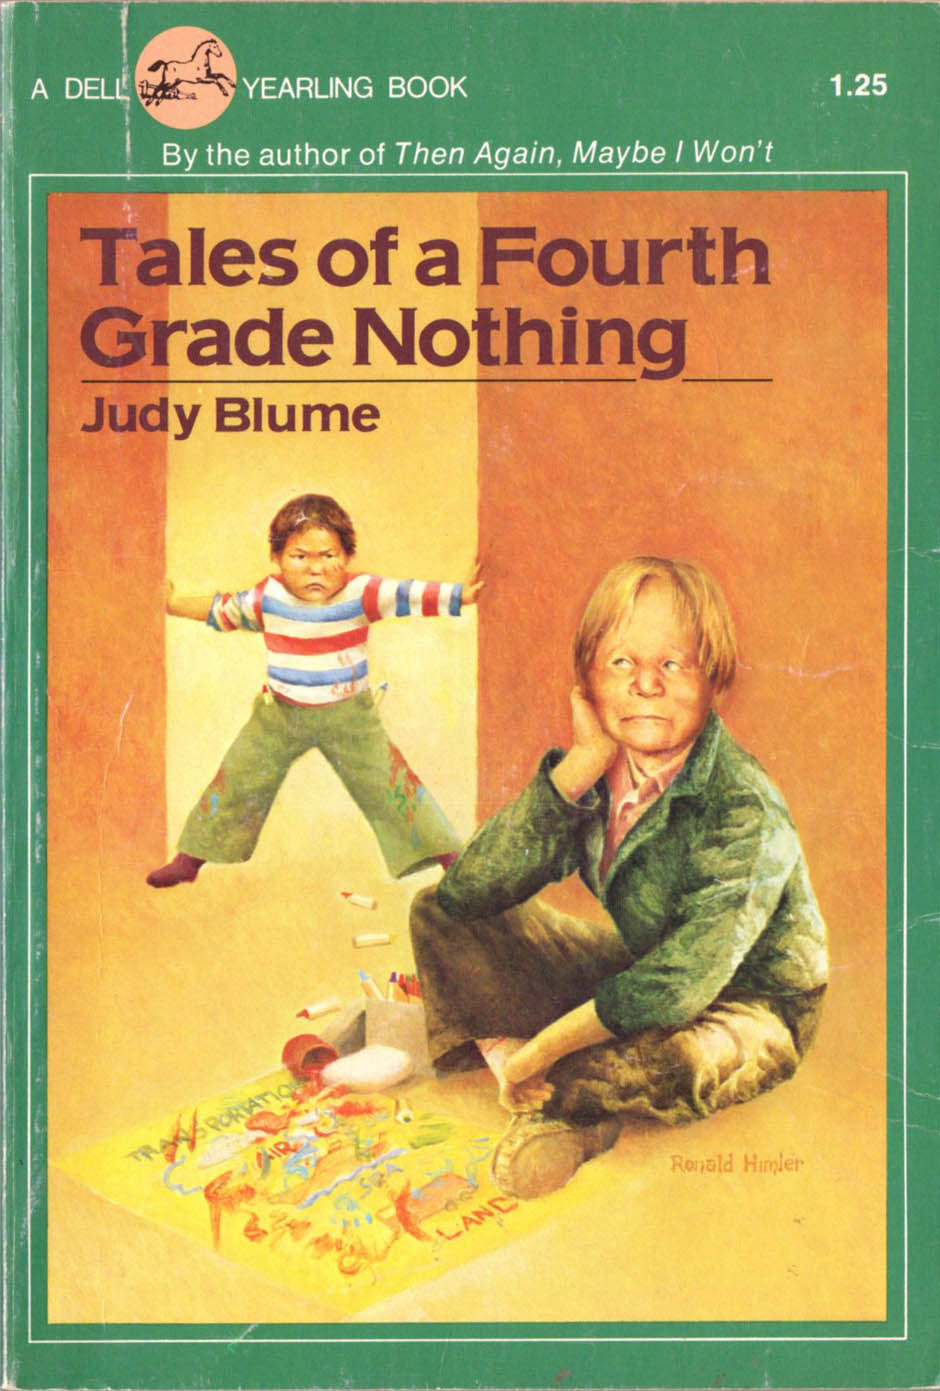 1977　TALES　NOTHING　FOURTH　OF　Blume,　A　GRADE　Judy　PB